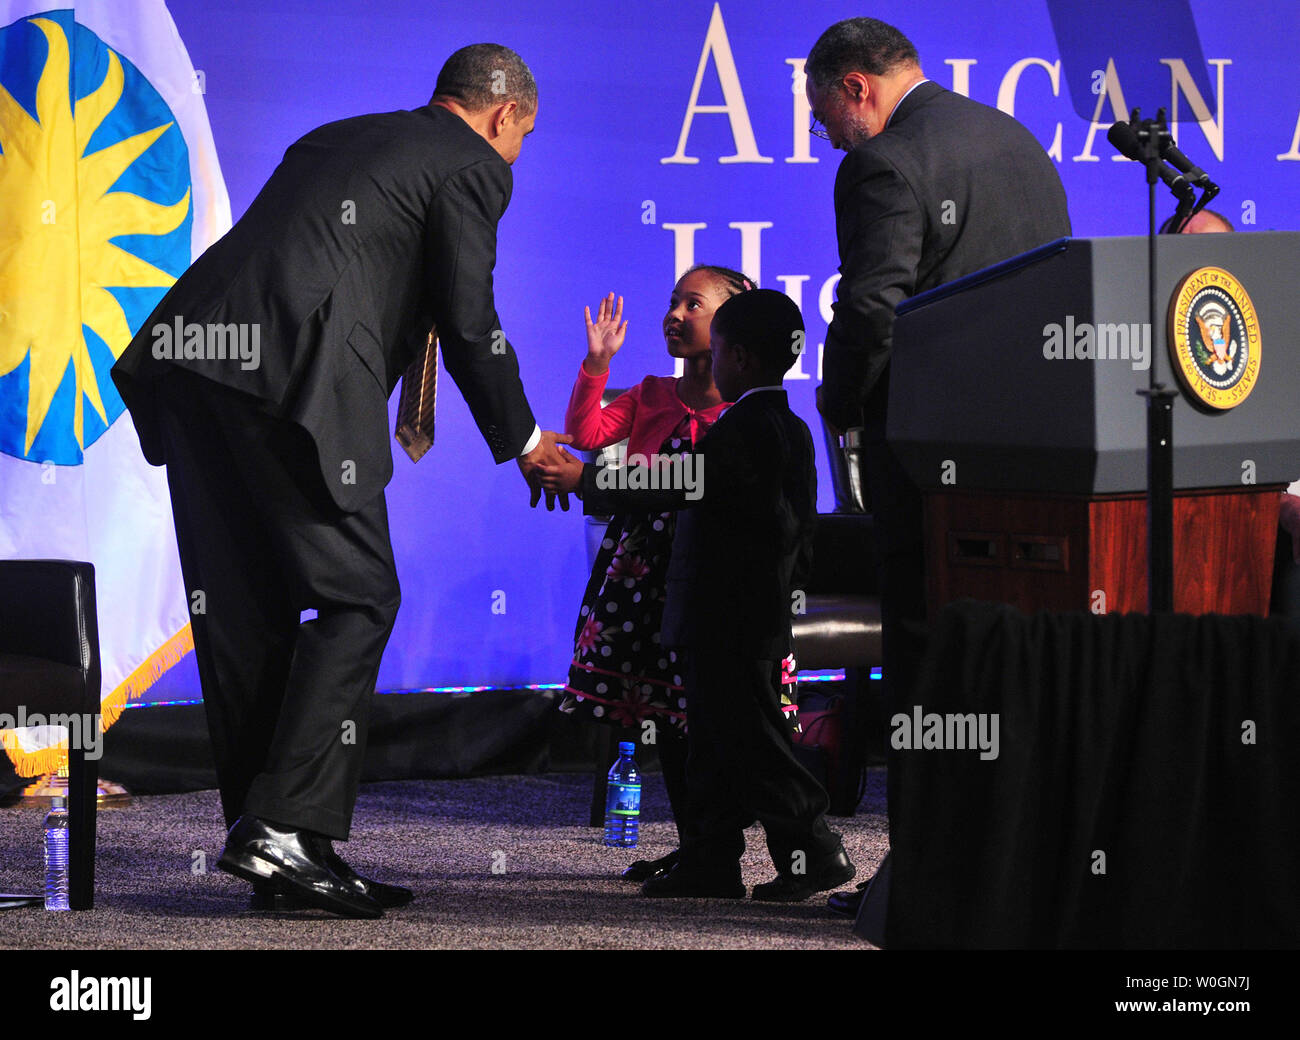 President Barack Obama greets students from the Brooklyn Montessori school at the ground breaking ceremony for the Smithsonian National Museum of African American History and Culture in Washington, D.C. on February 22, 2012. The museum is set to open in 2015. UPI/Kevin Dietsch Stock Photo